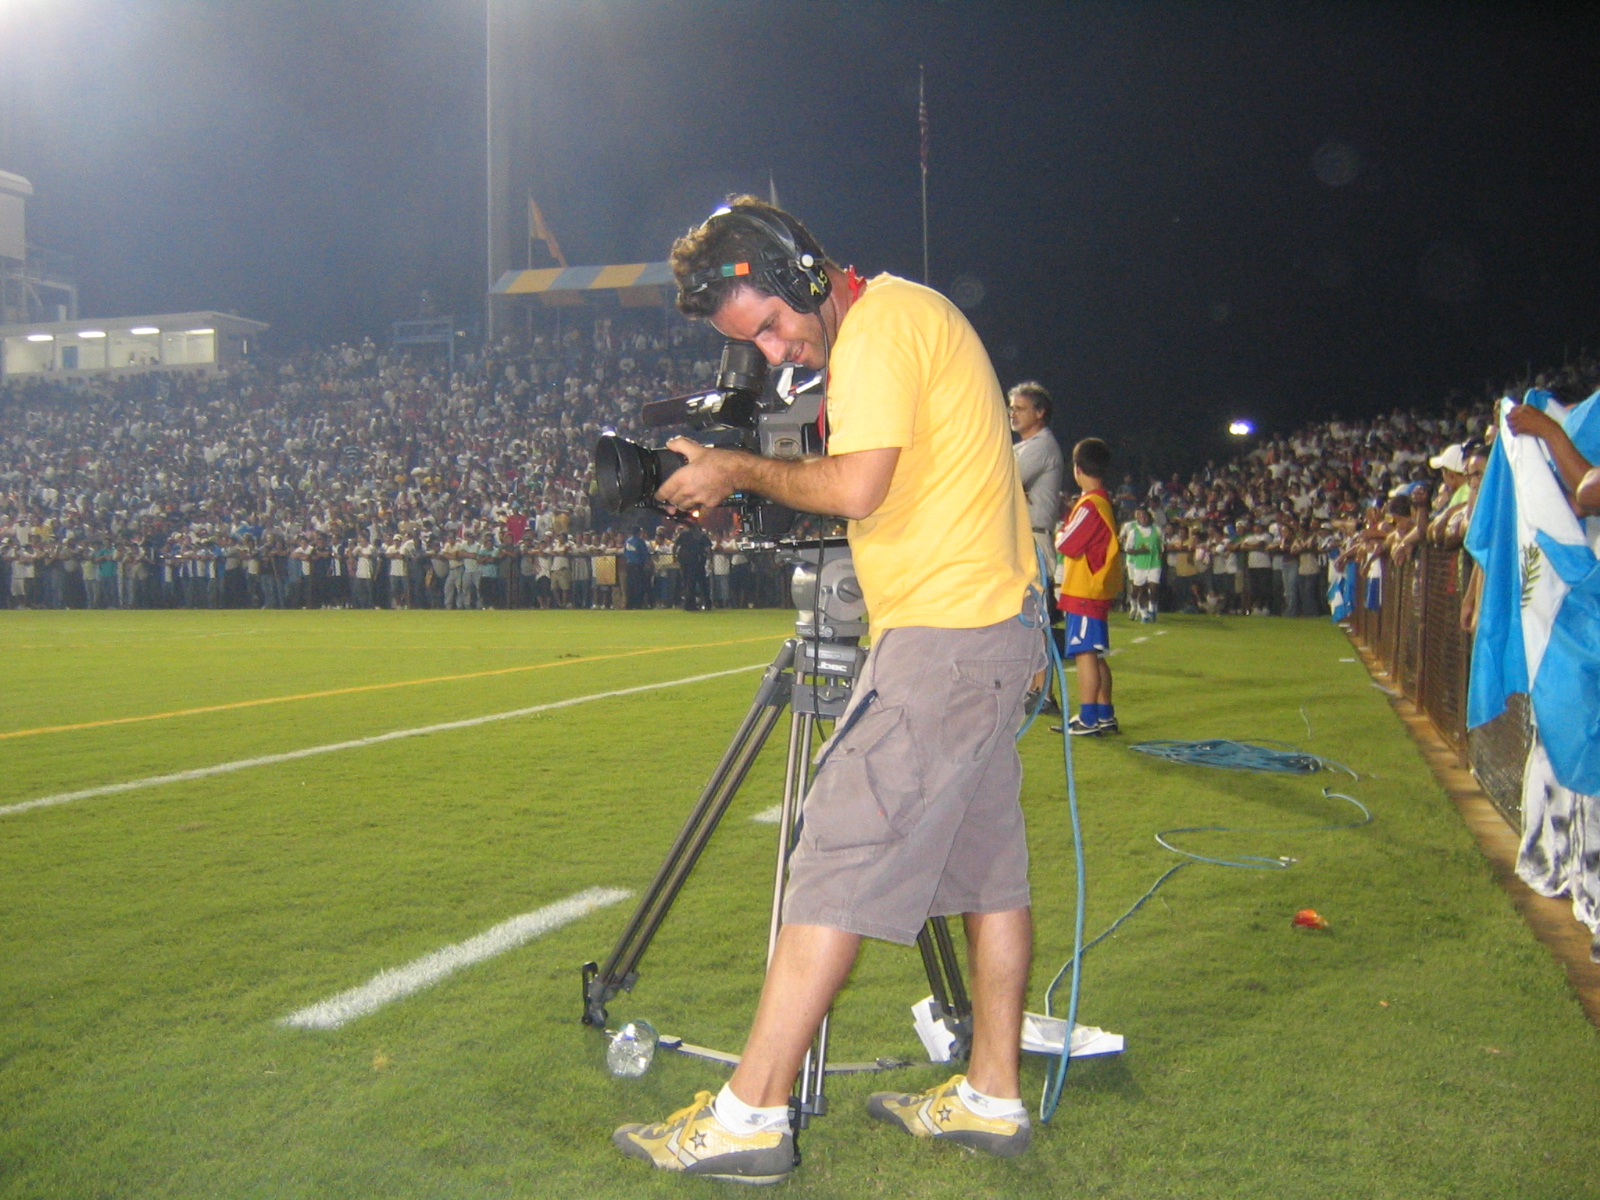 LIVE TV EVENTS SPORTS PRODUCTION